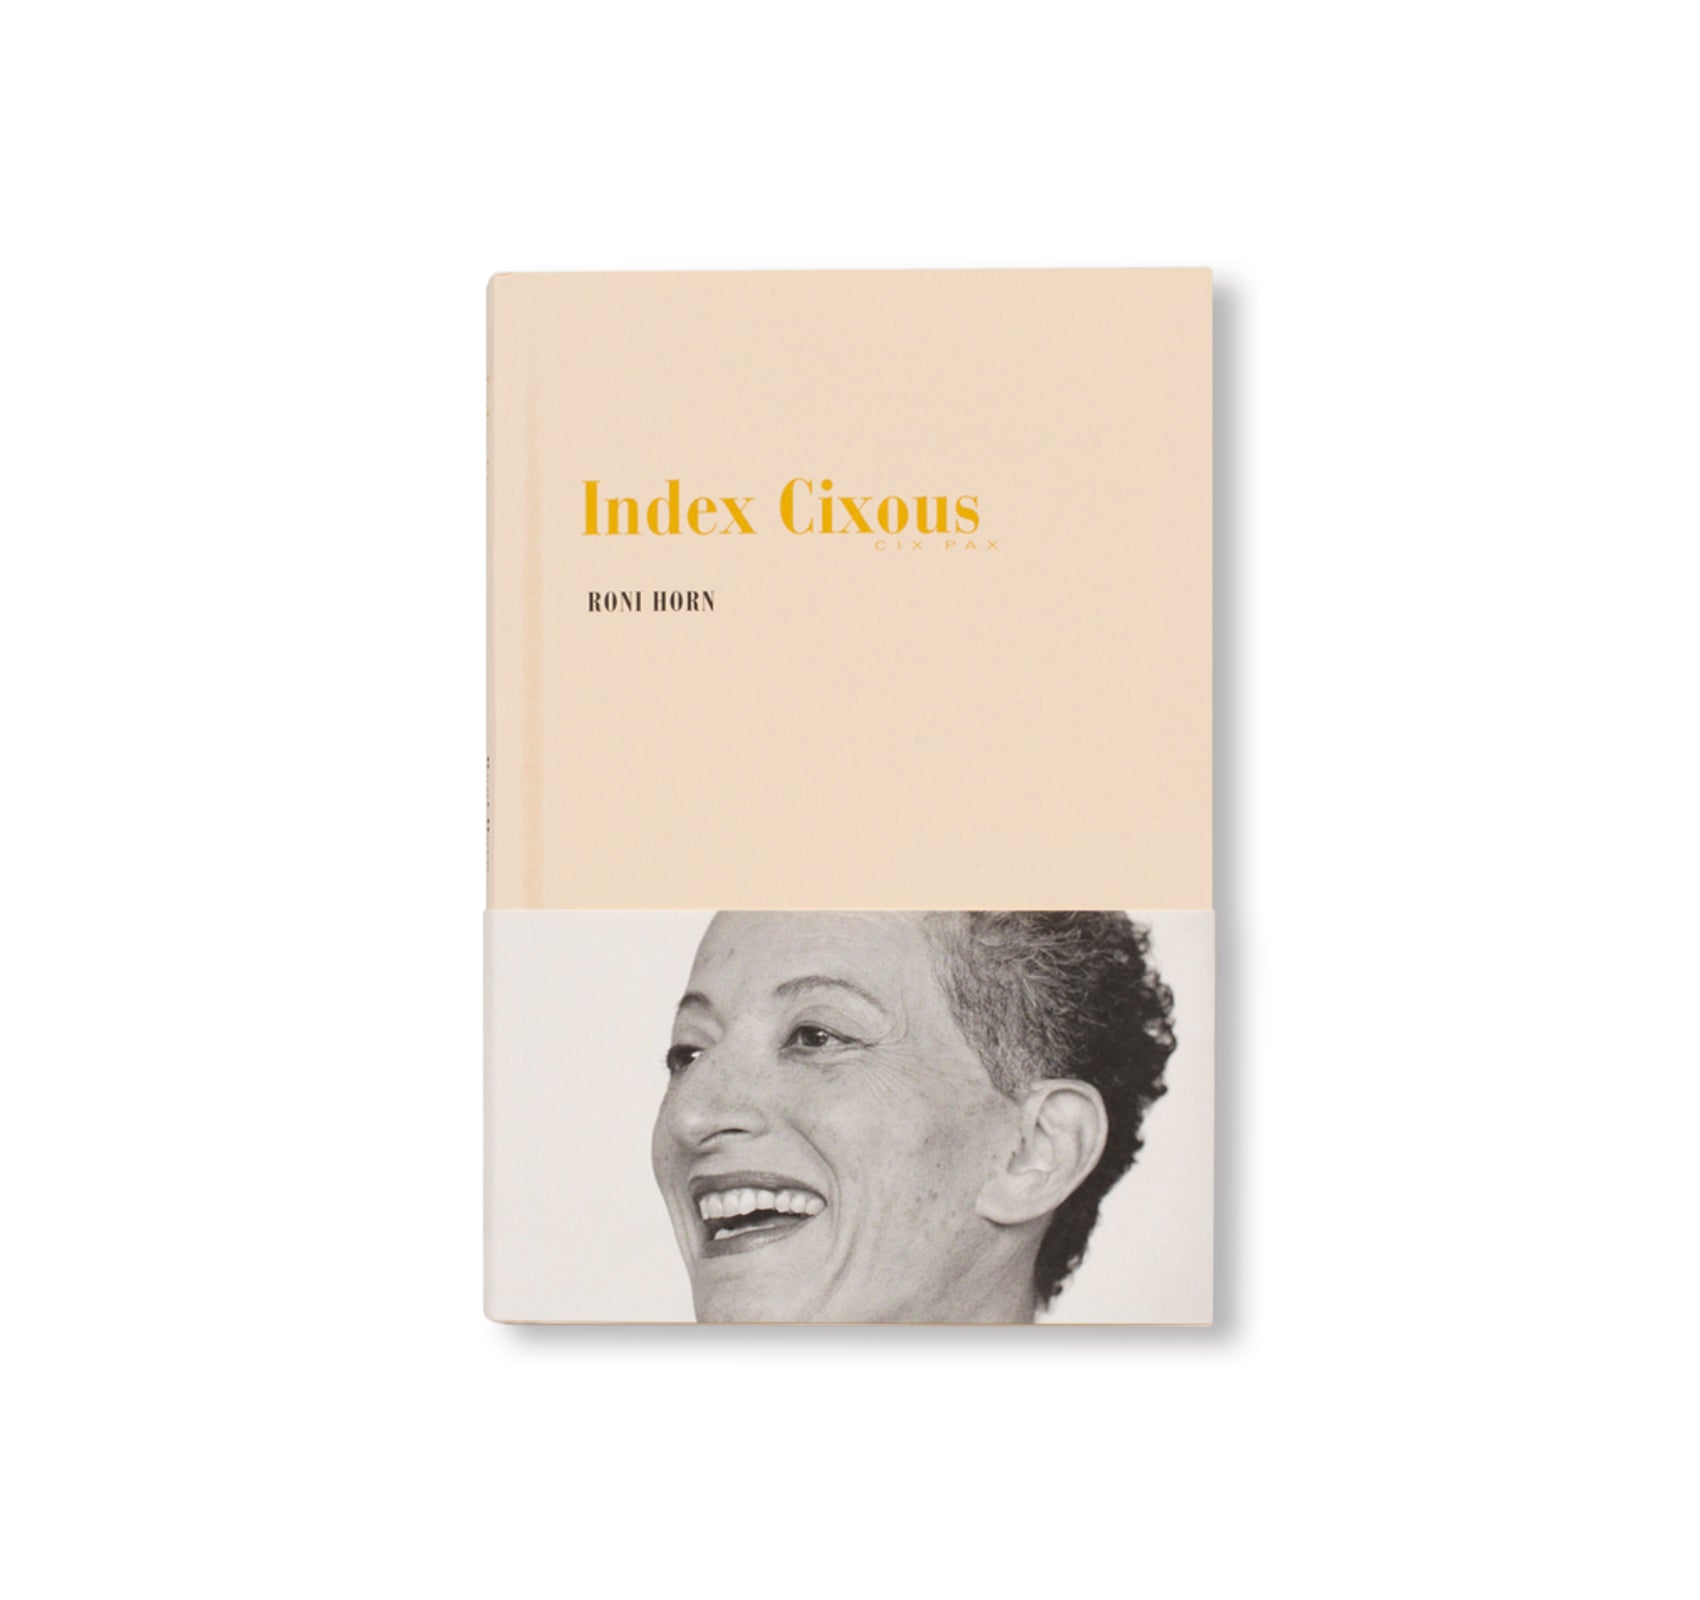 INDEX CIXOUS by Roni Horn